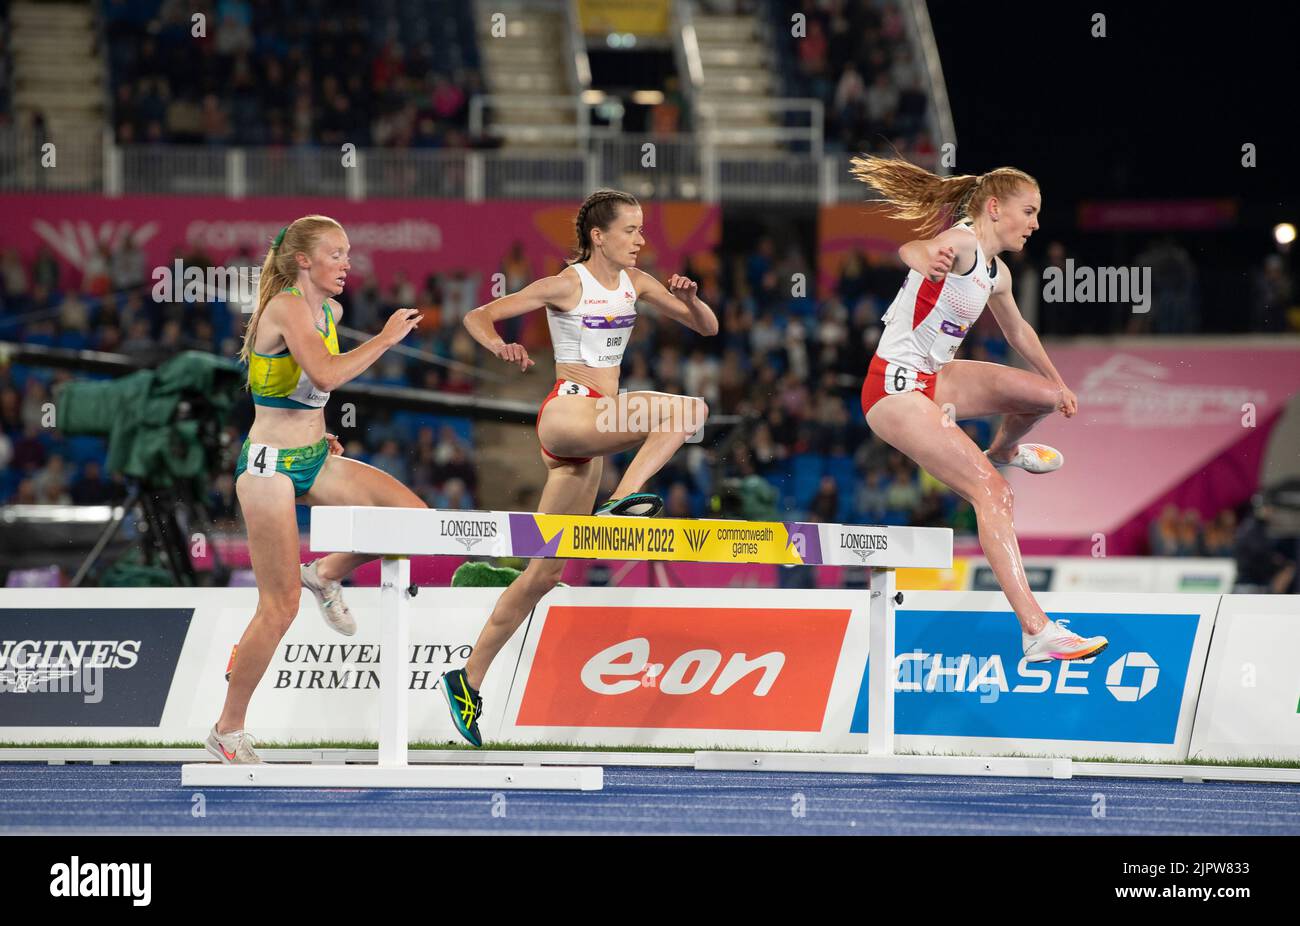 Amy Cashin of Australia and Lizzie Bird and Aimee Pratt of England competing in the women’s 3000m steeplechase final at the Commonwealth Games at Alex Stock Photo